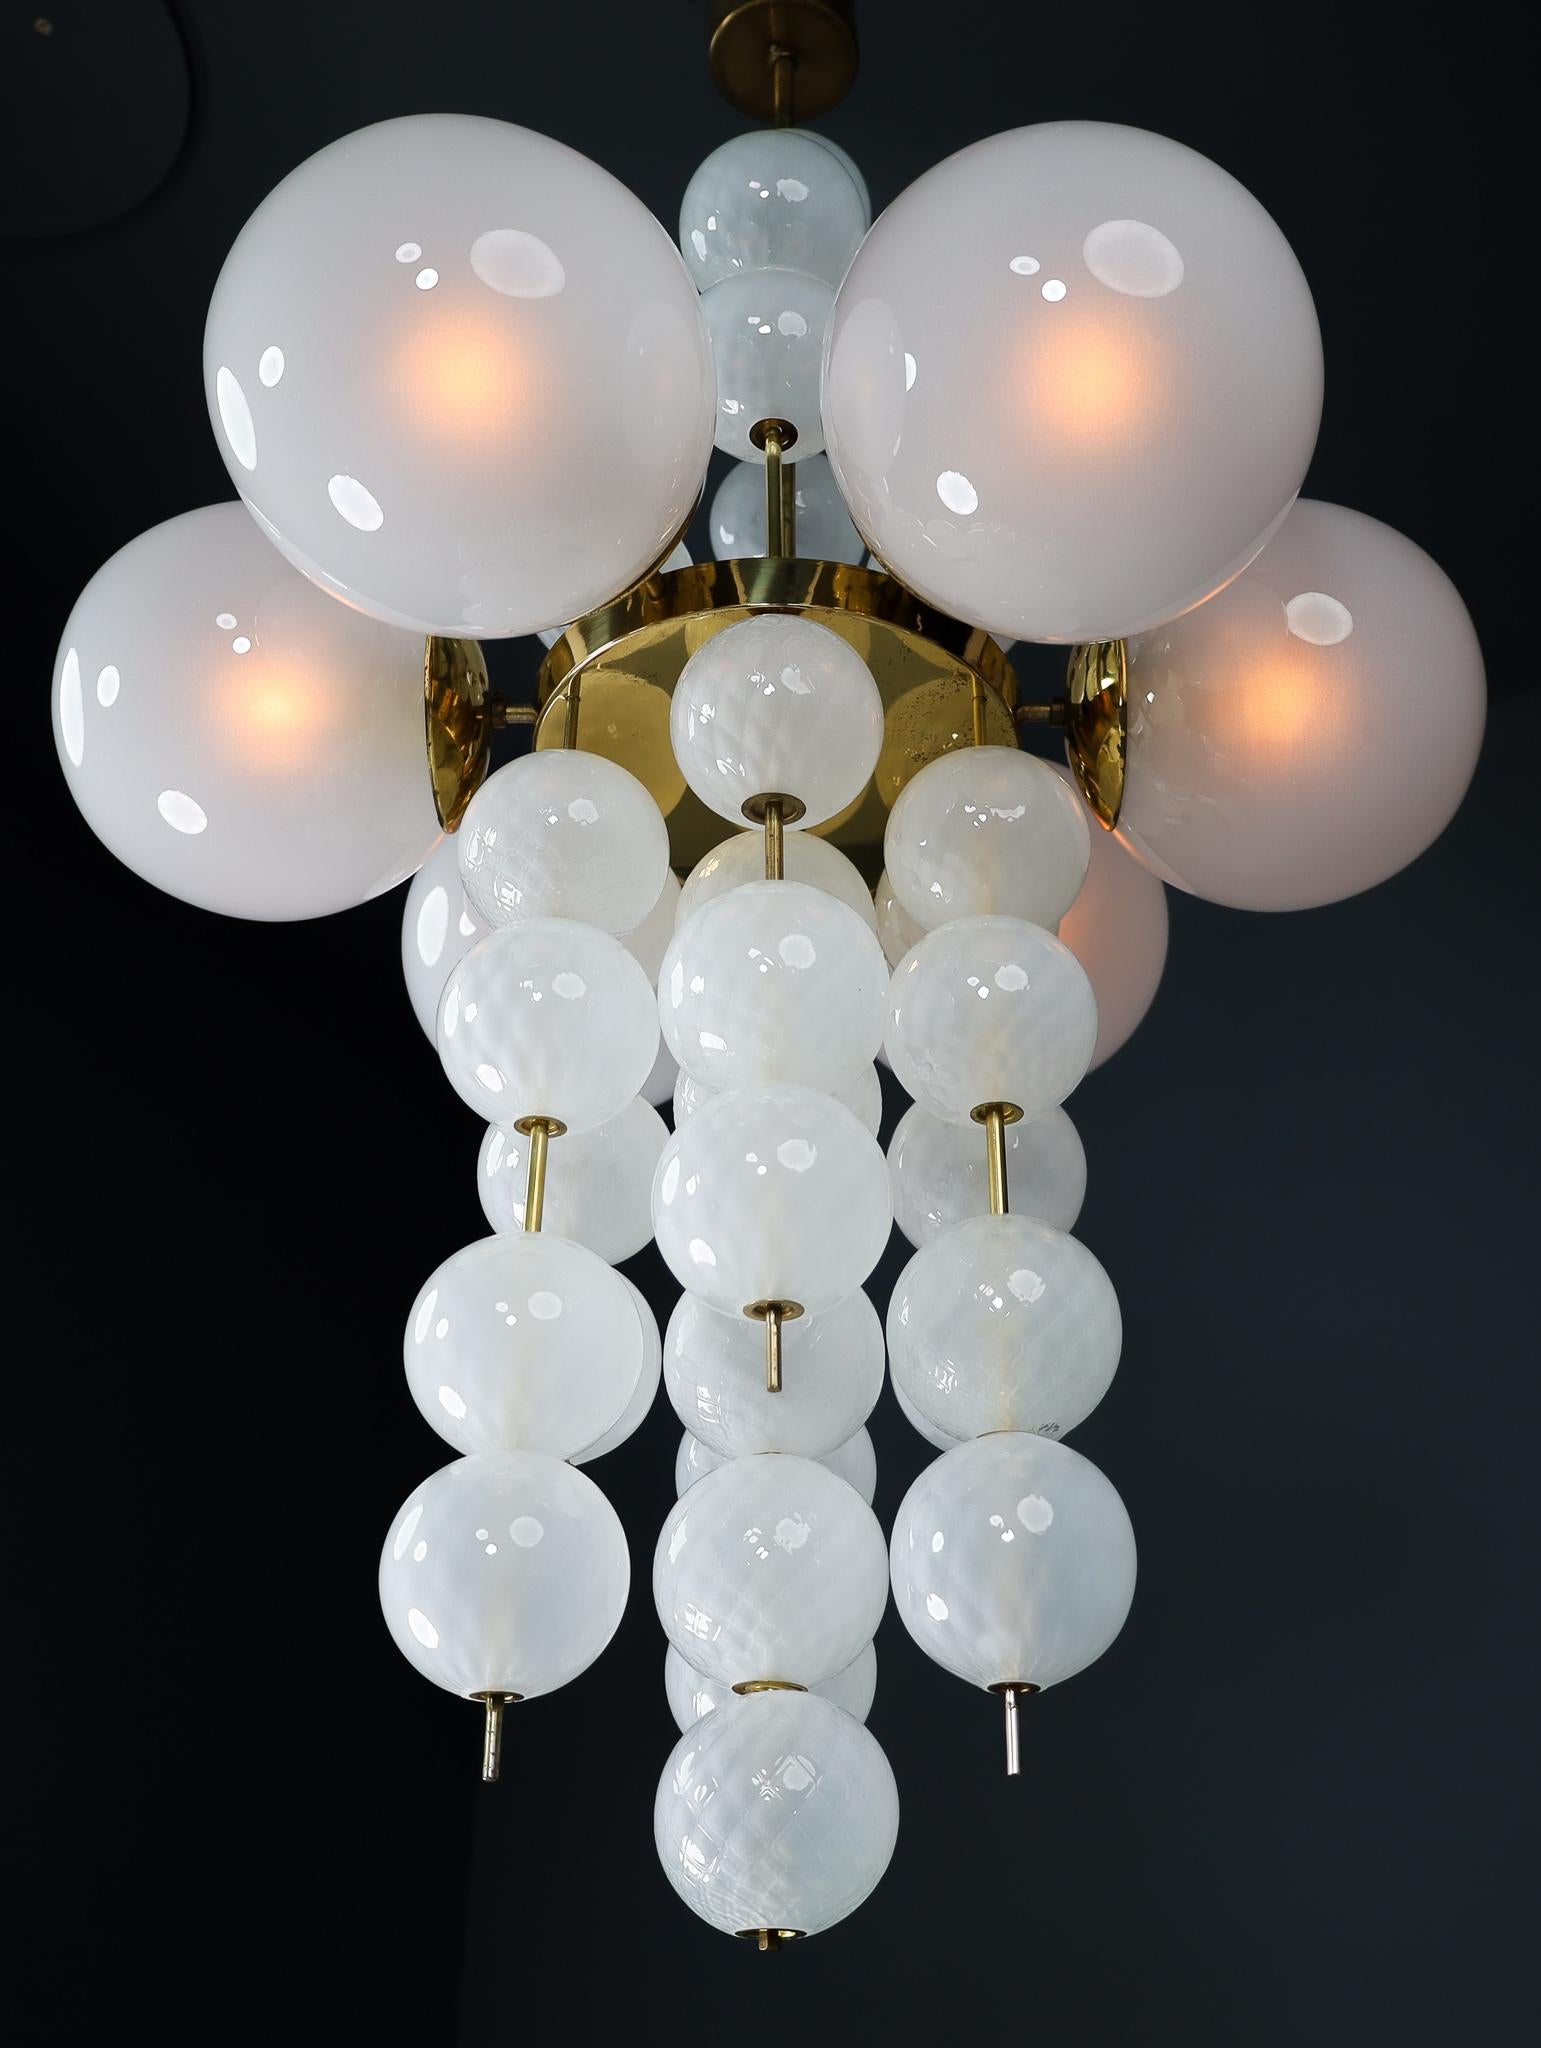 Set of 3 XL Hotel Chandeliers with Brass Fixture and Hand-Blowed Glass Globes 8